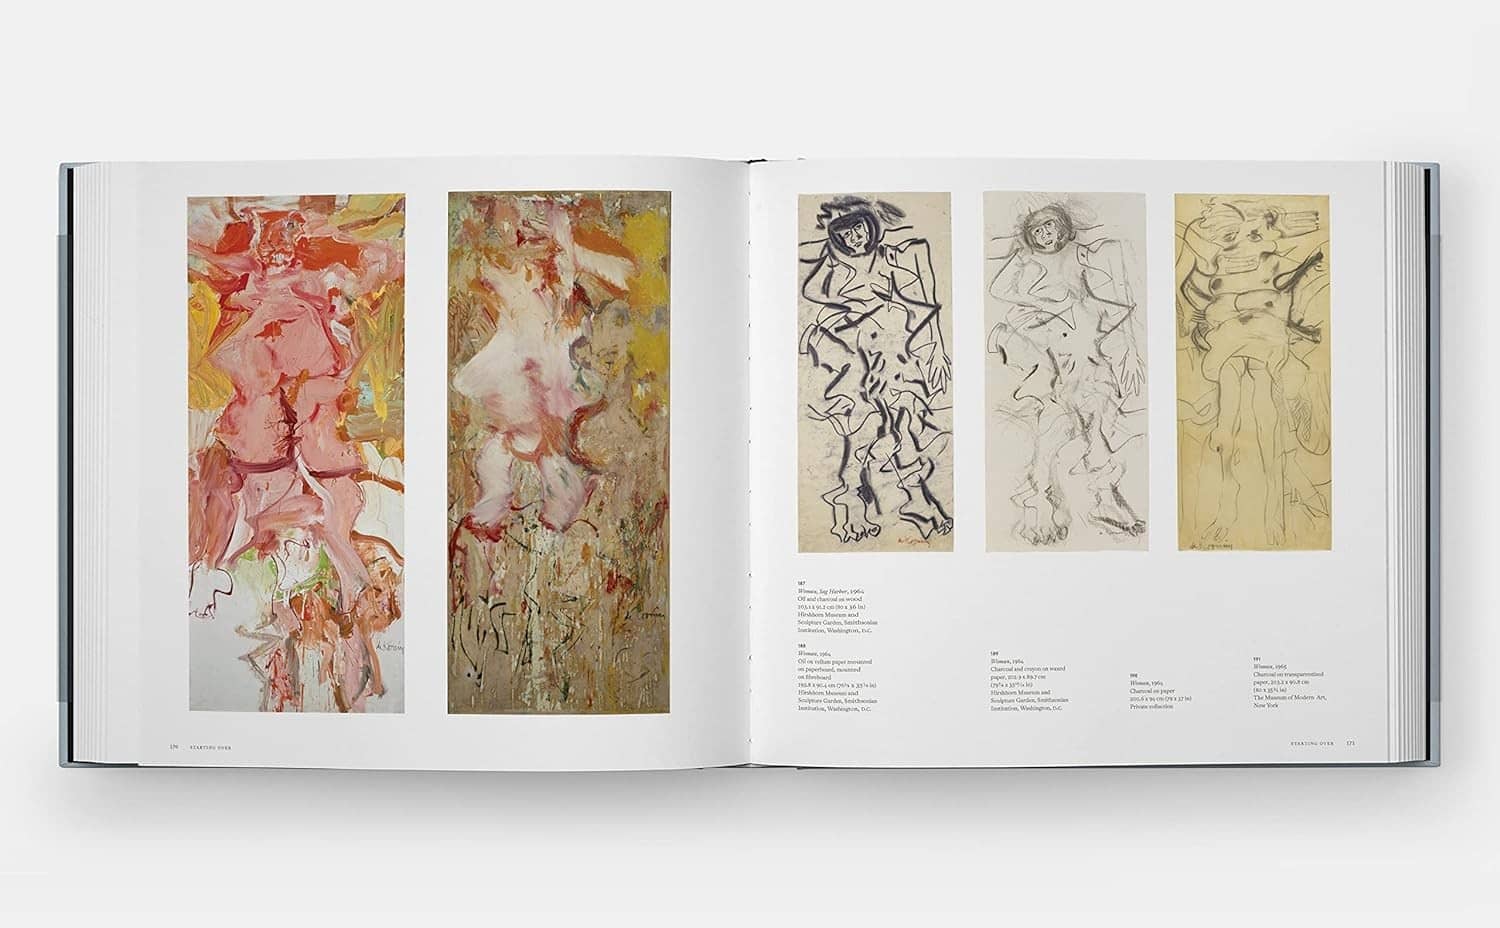 17641-a-way-of-living-the-art-of-willem-de-kooning-81agfouudil-sl1500